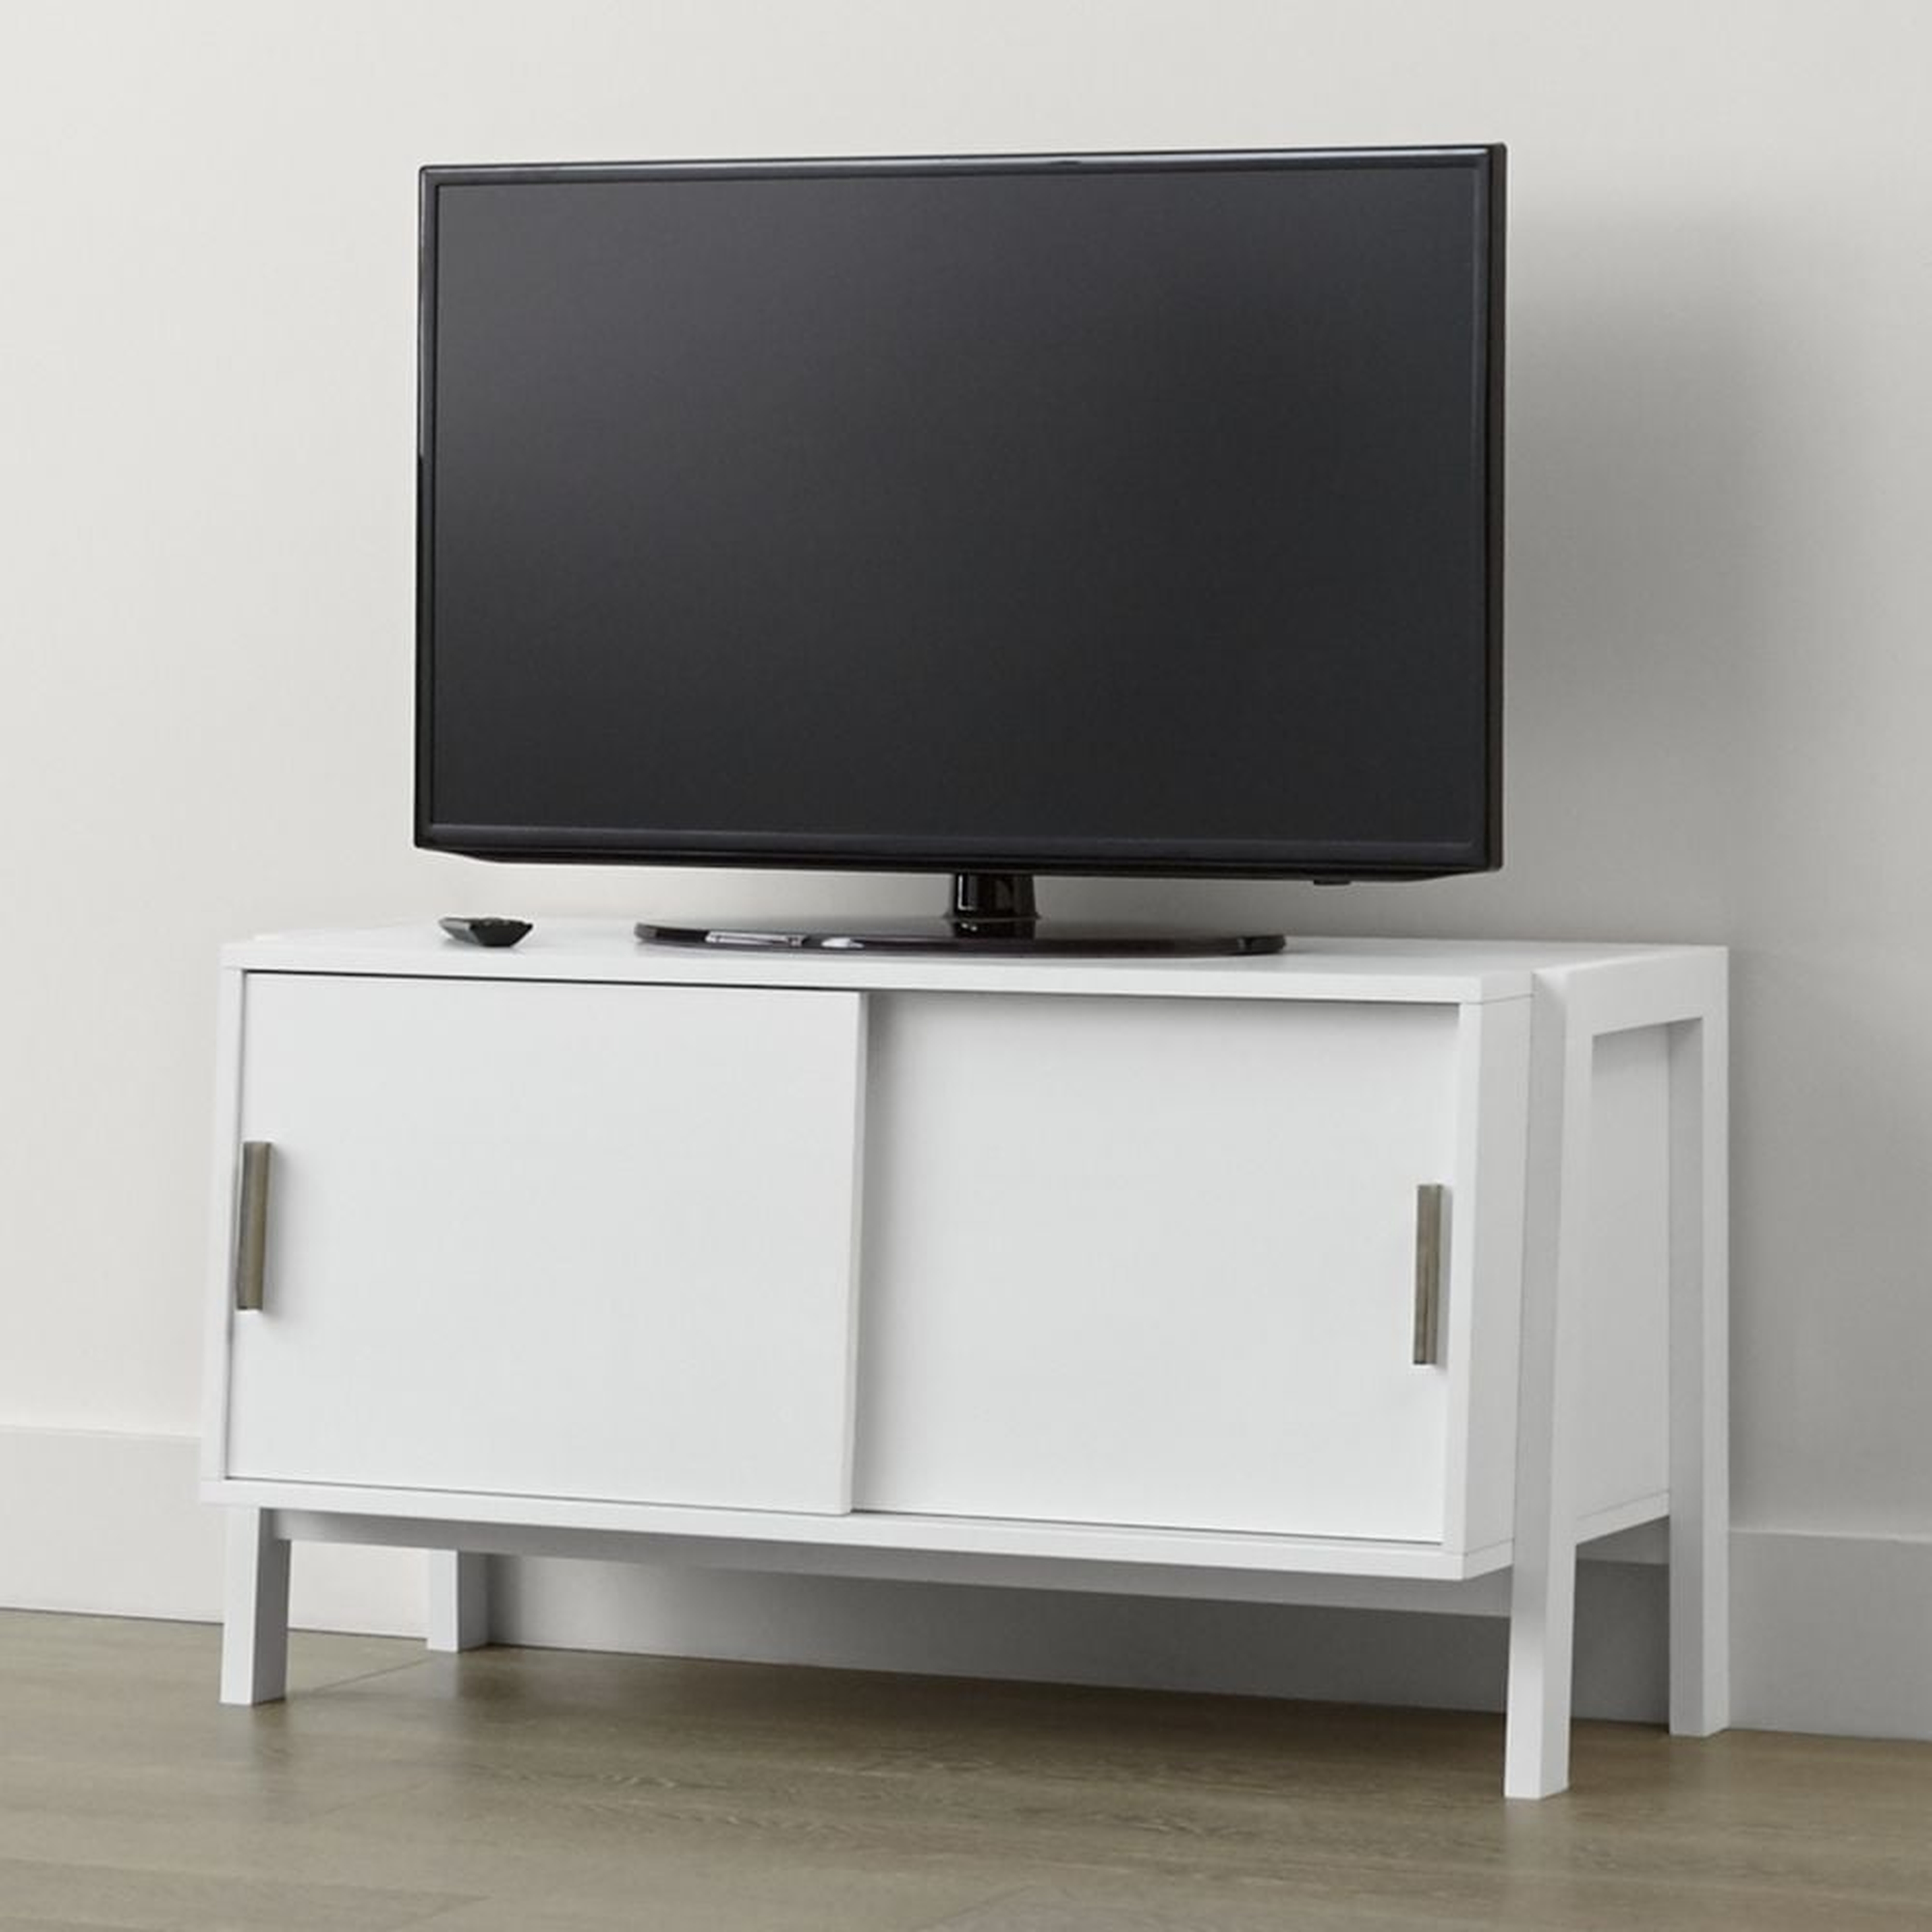 Sawyer Low White Media Stand - Crate and Barrel